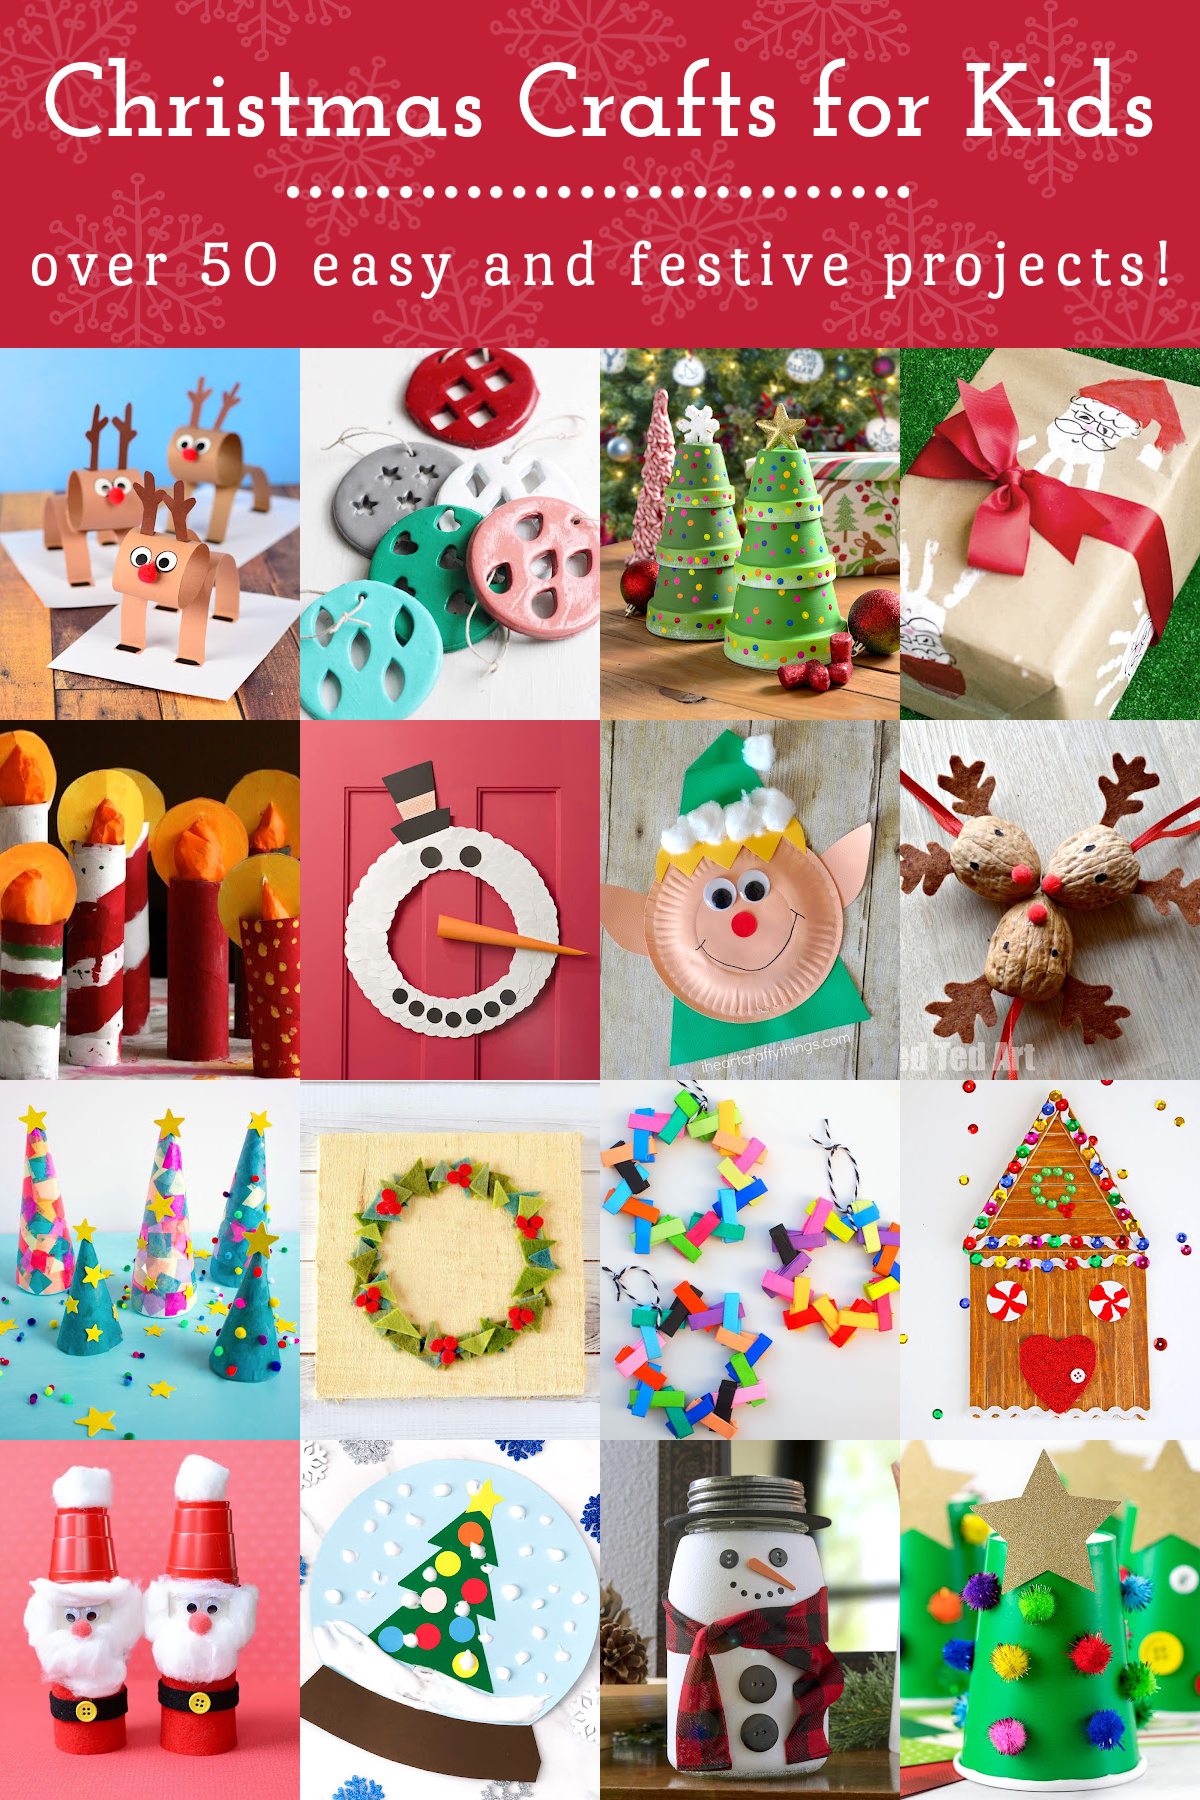 Fun Christmas Crafts for Kids to Try